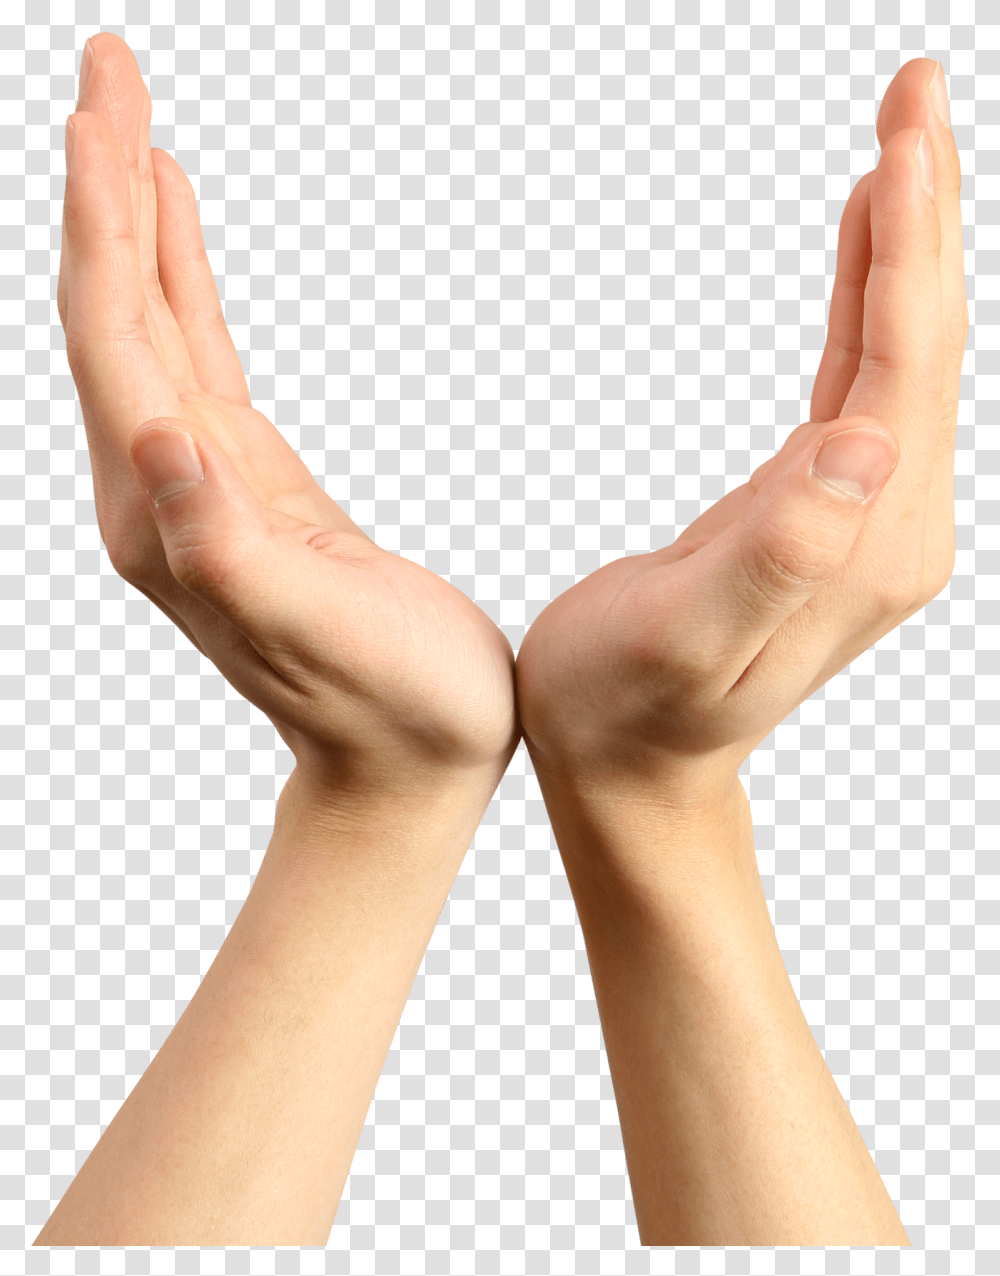 Hands Free Images Pictures Download Hand Healing Hands, Person, Human, Wrist, Finger Transparent Png